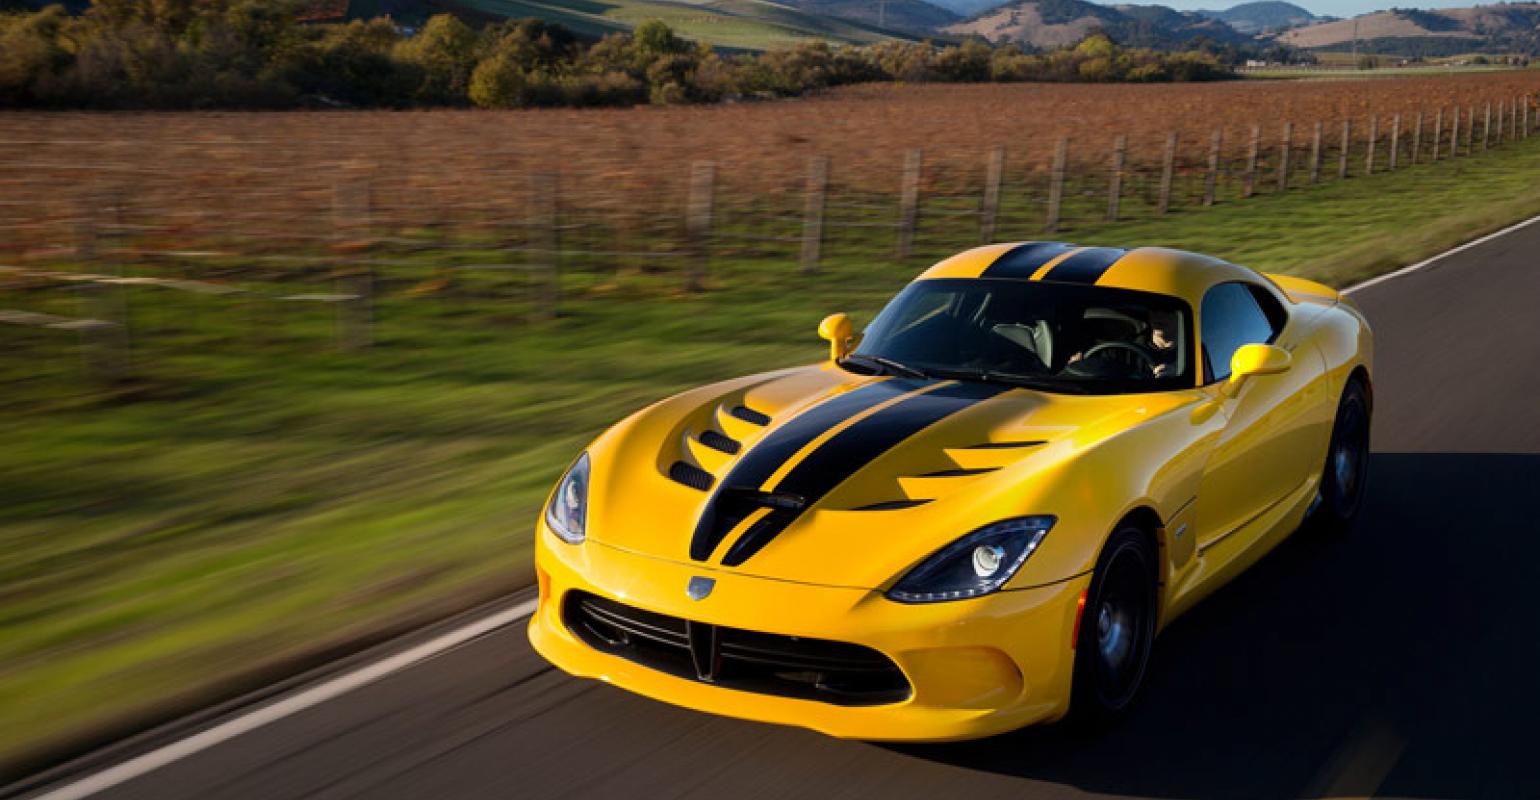 Building SRT Viper by Hand Attracts Dedicated Buyers | WardsAuto